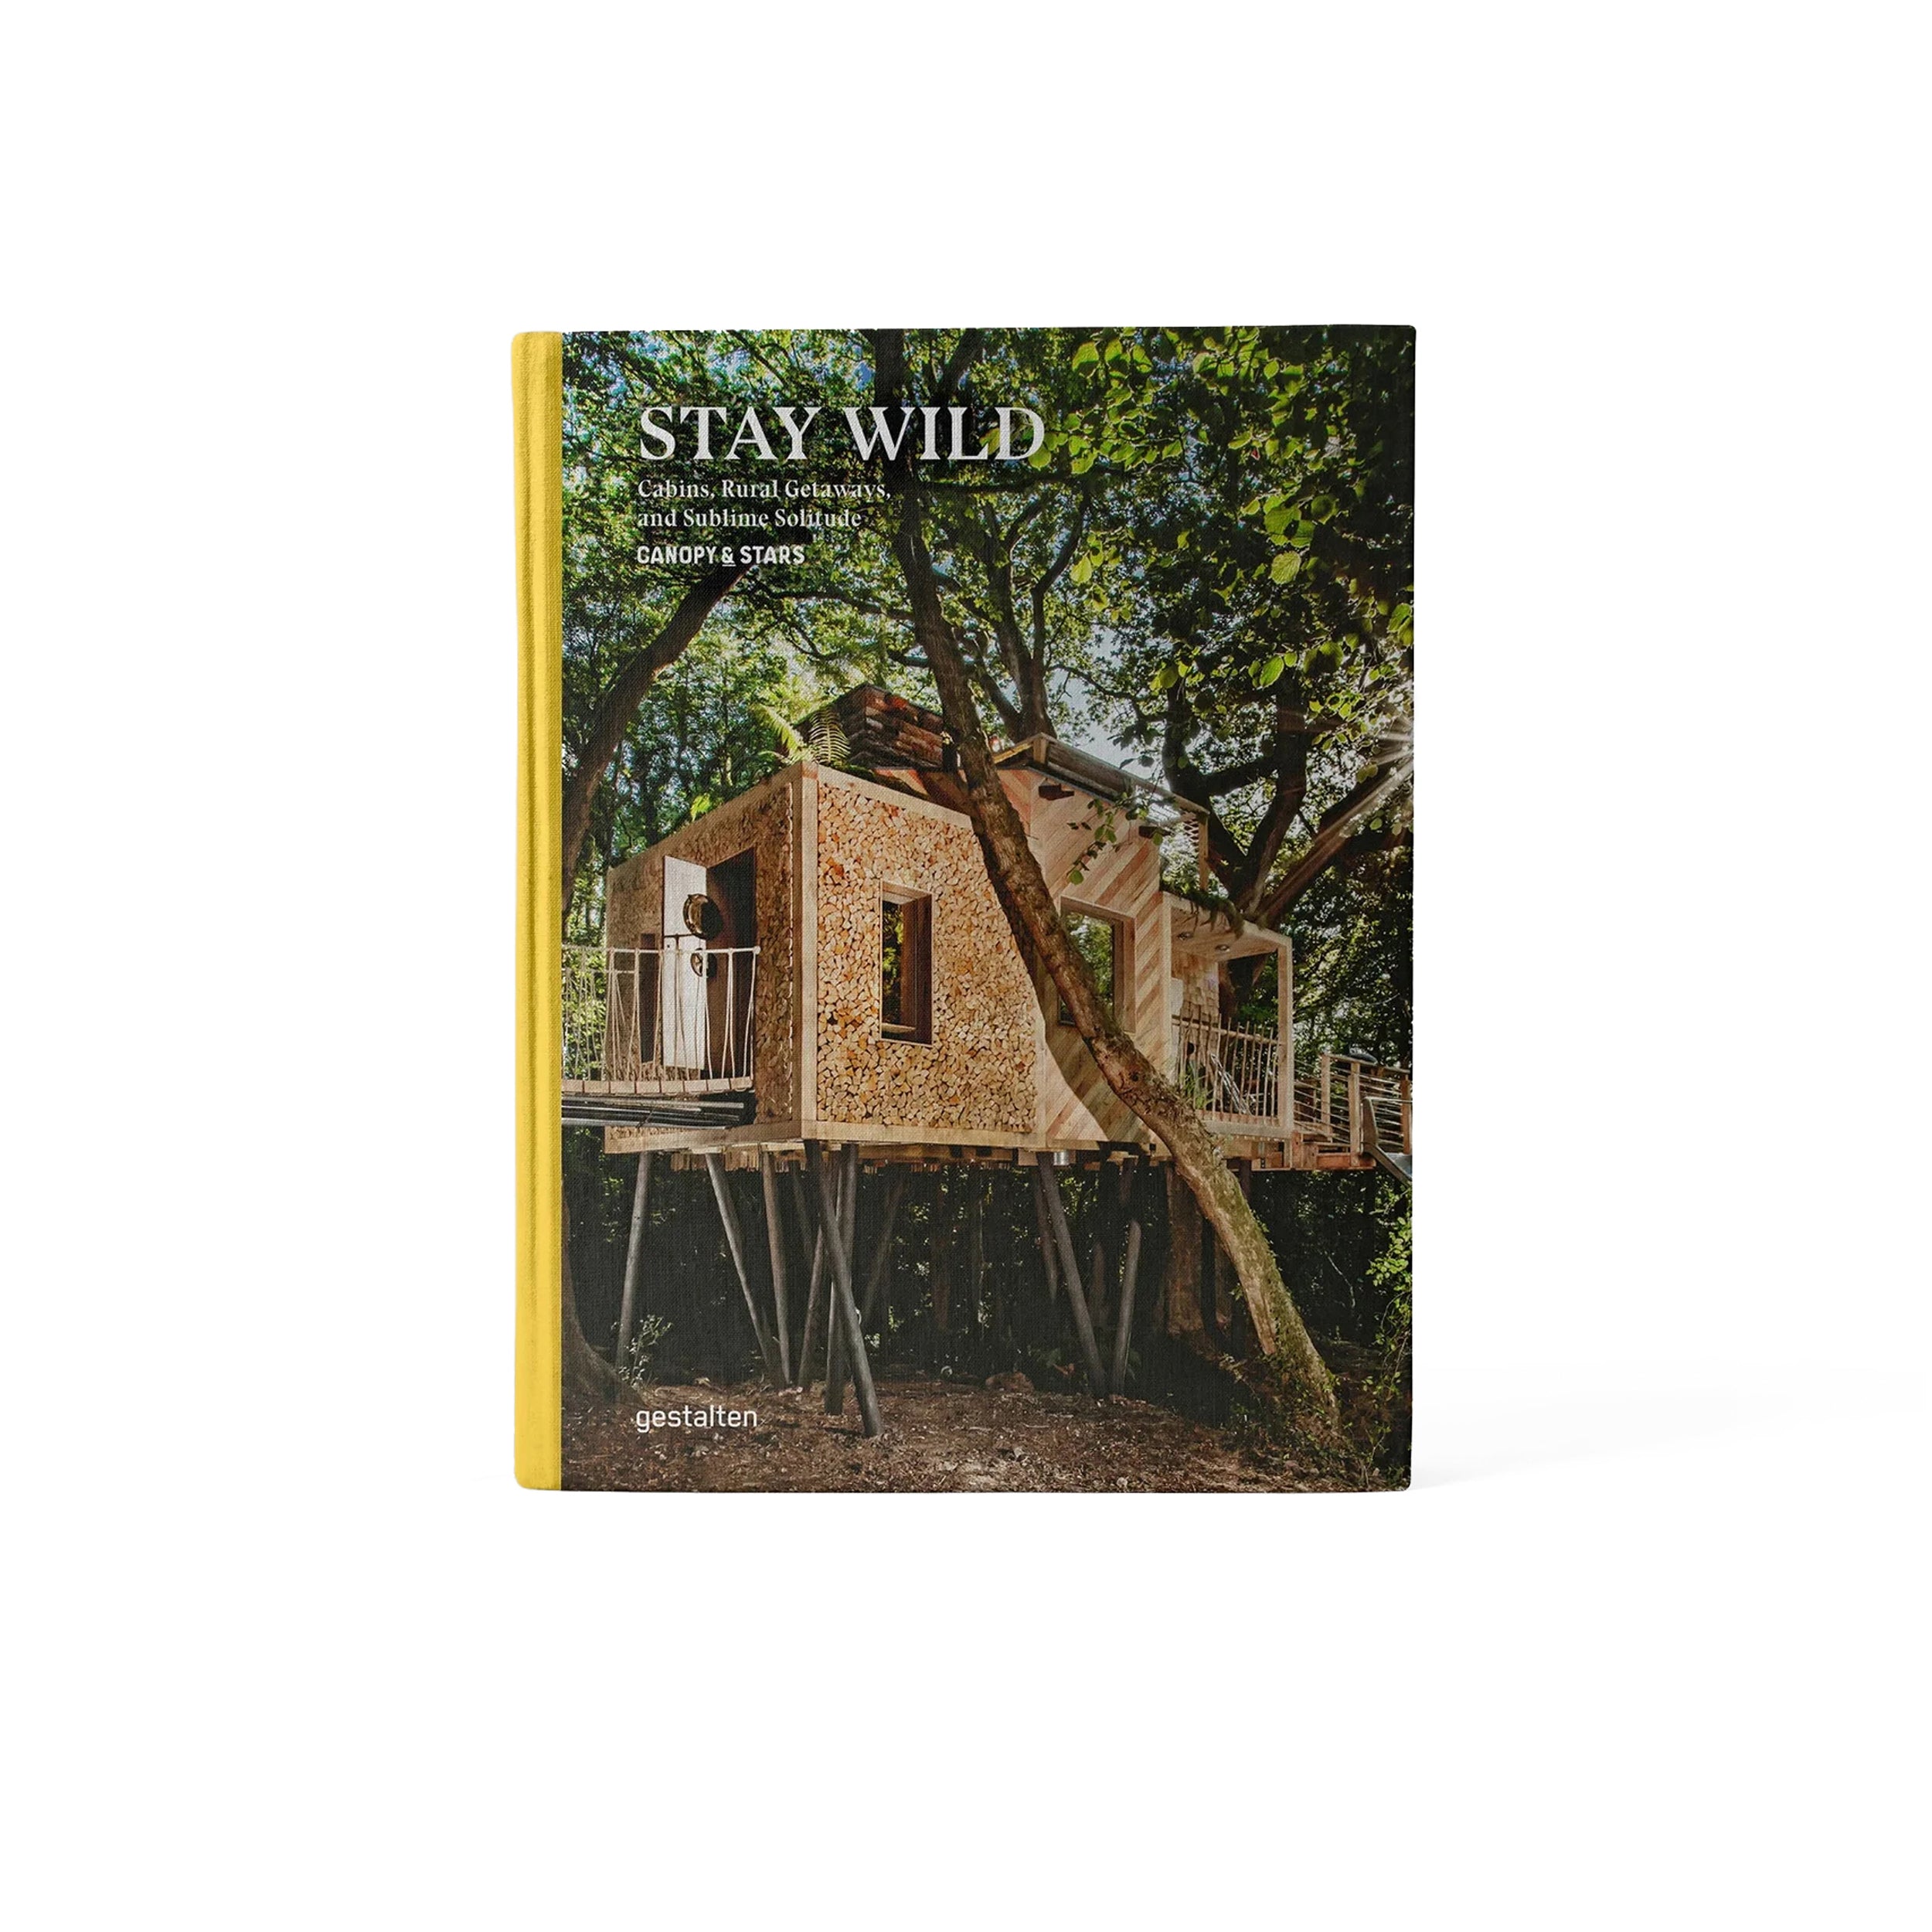 Stay Wild : Cabins, Rural Getaways, and Sublime Solitude